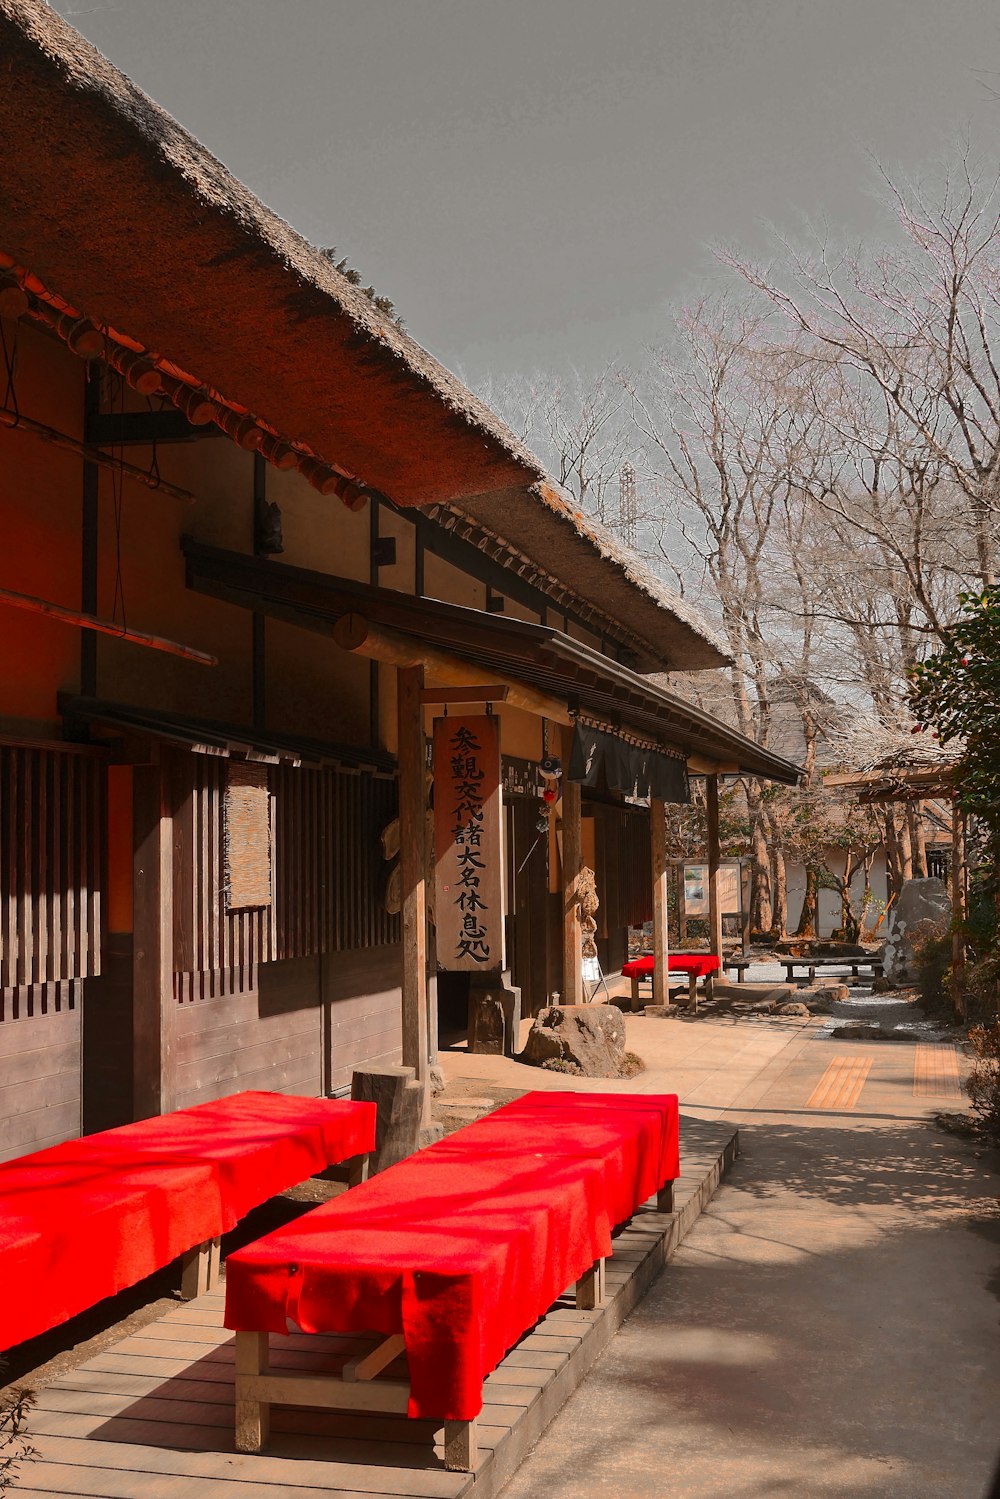 a row of red benches sitting in front of a building